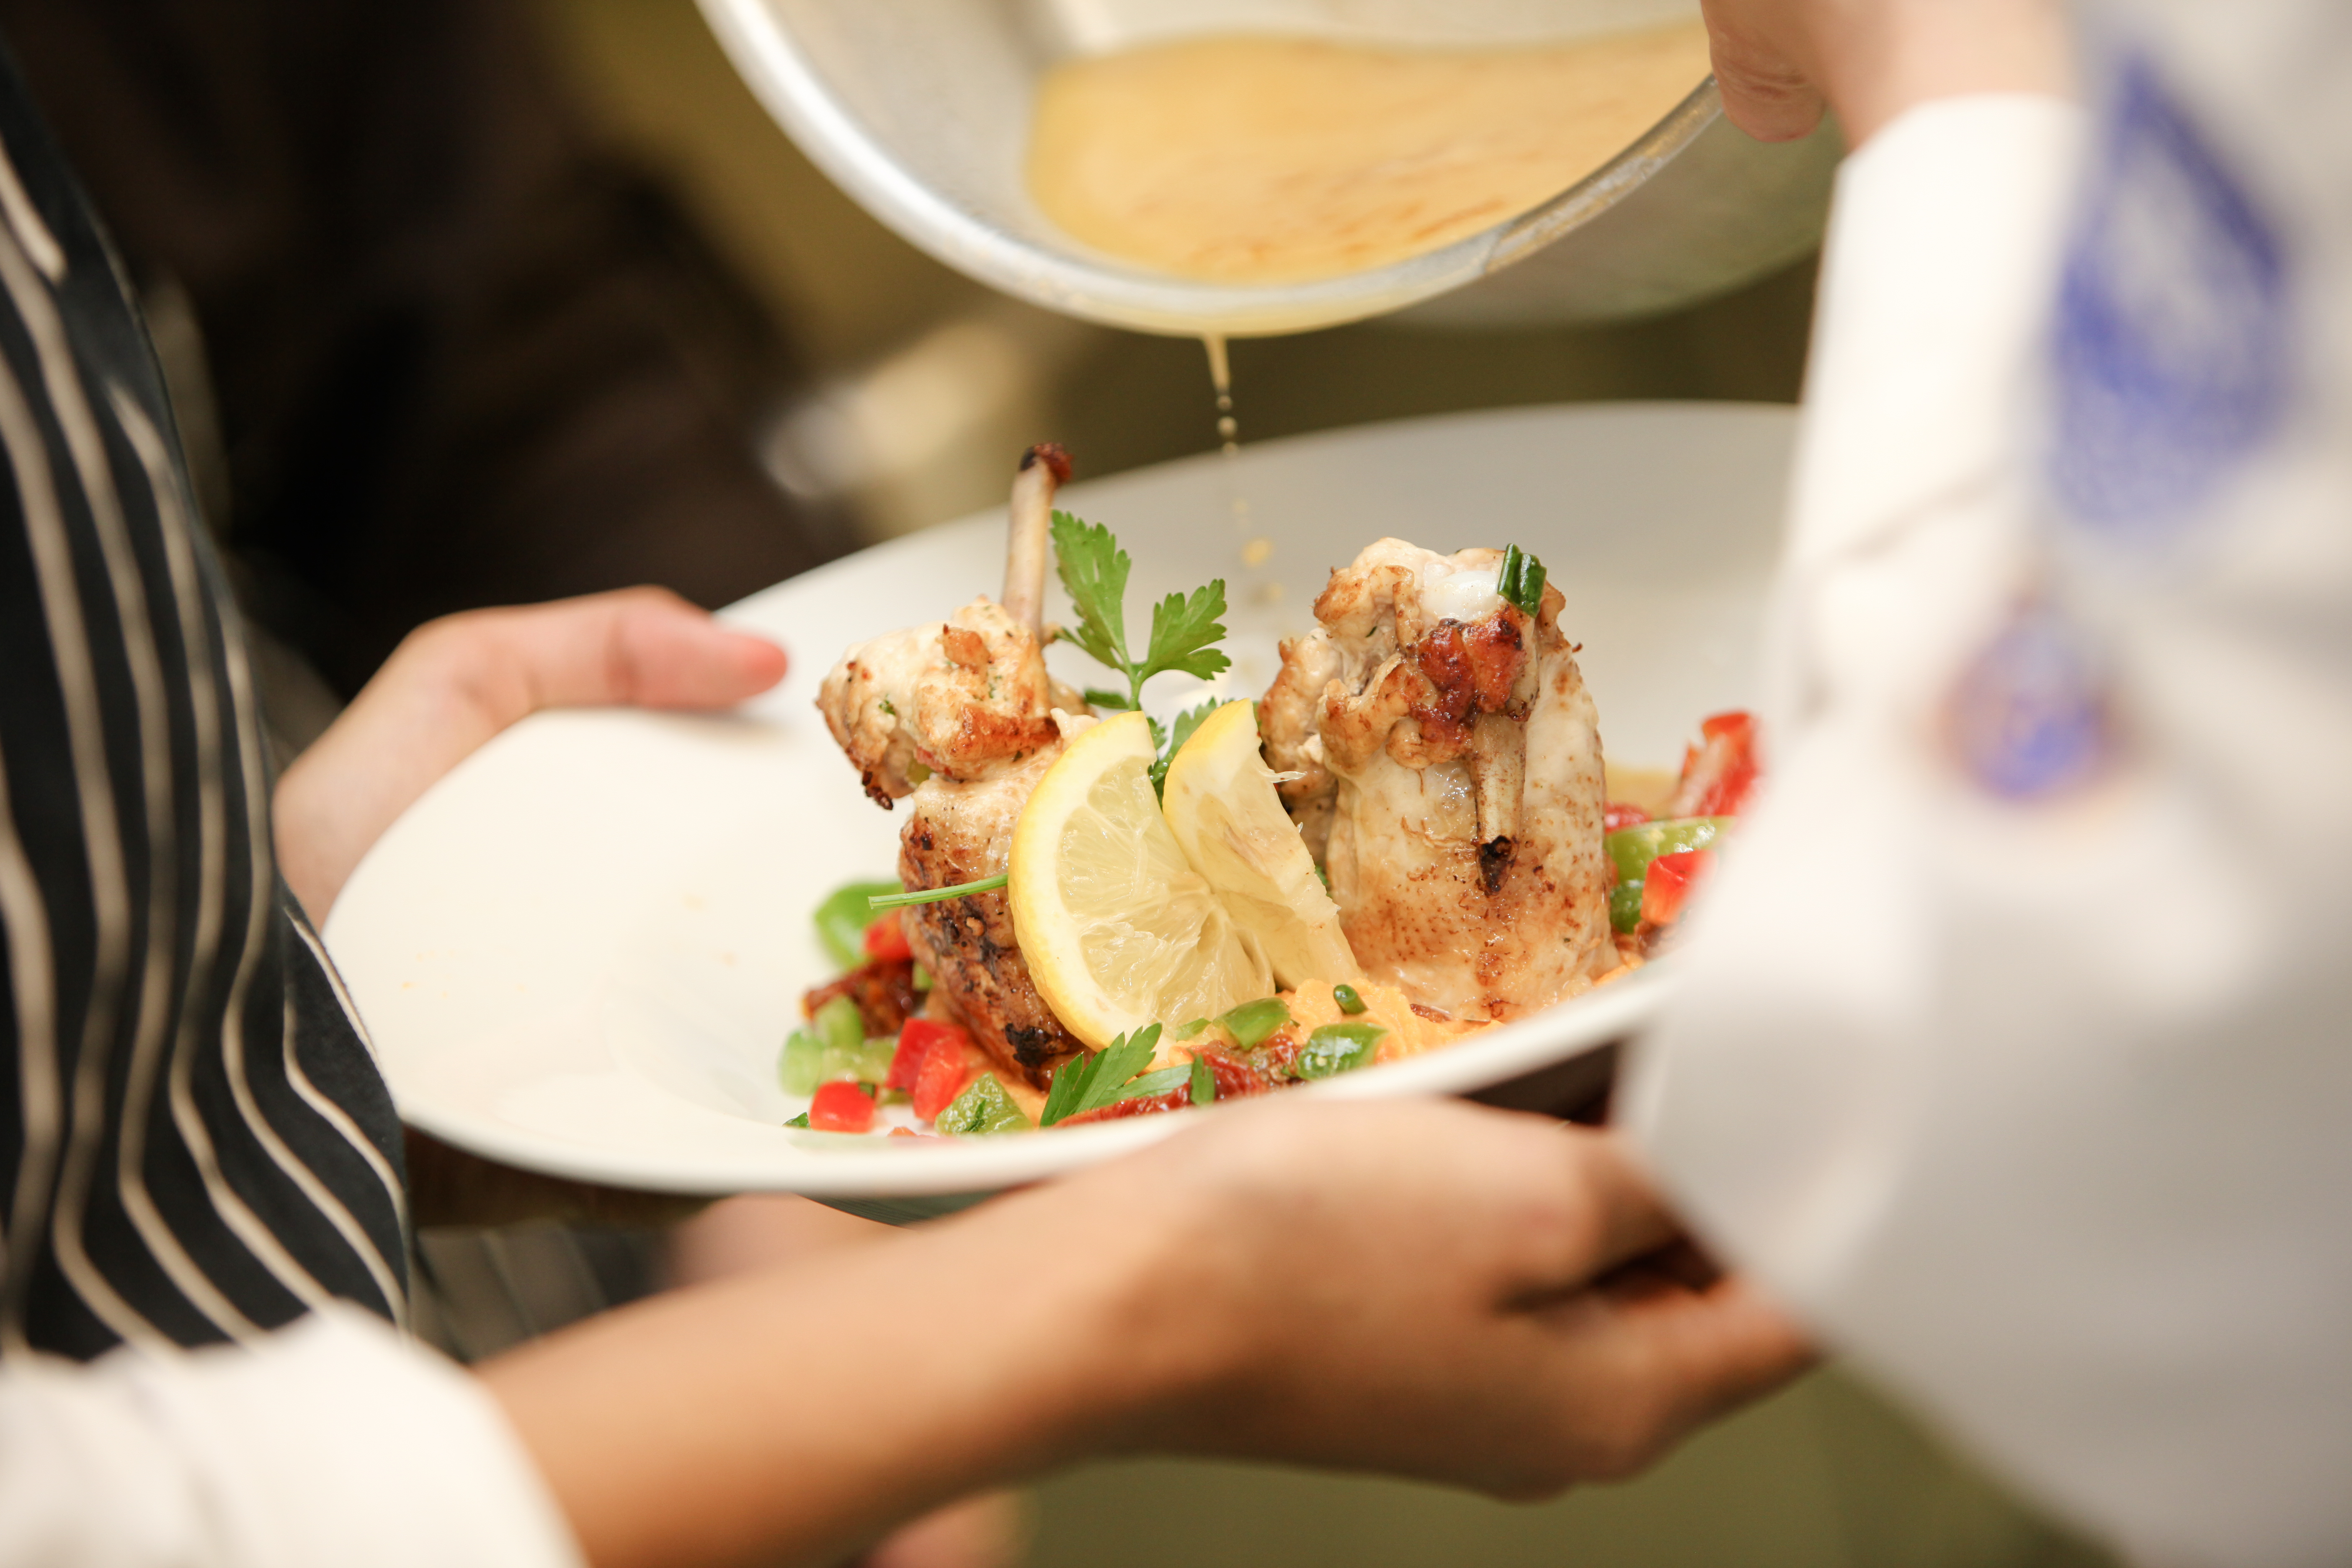 Salaries in Catering and Hospitality Sector on the Increase